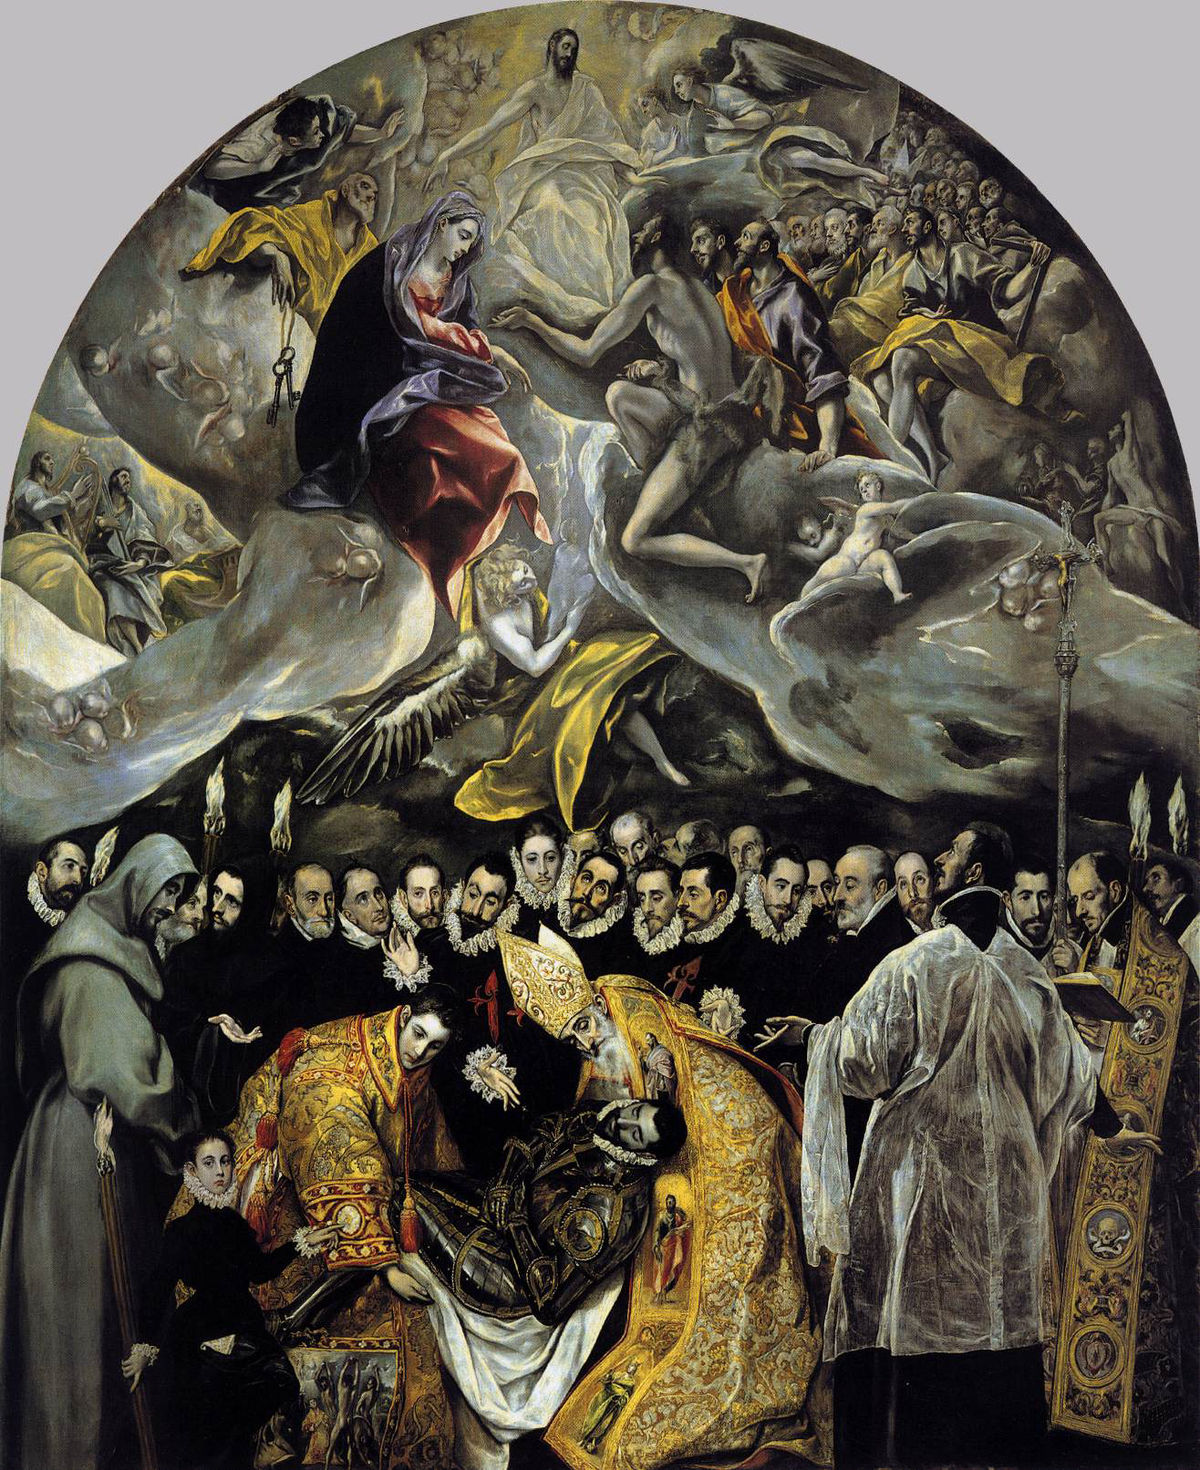 El Greco "The Burial Of The Count Of Orgaz" (1586)